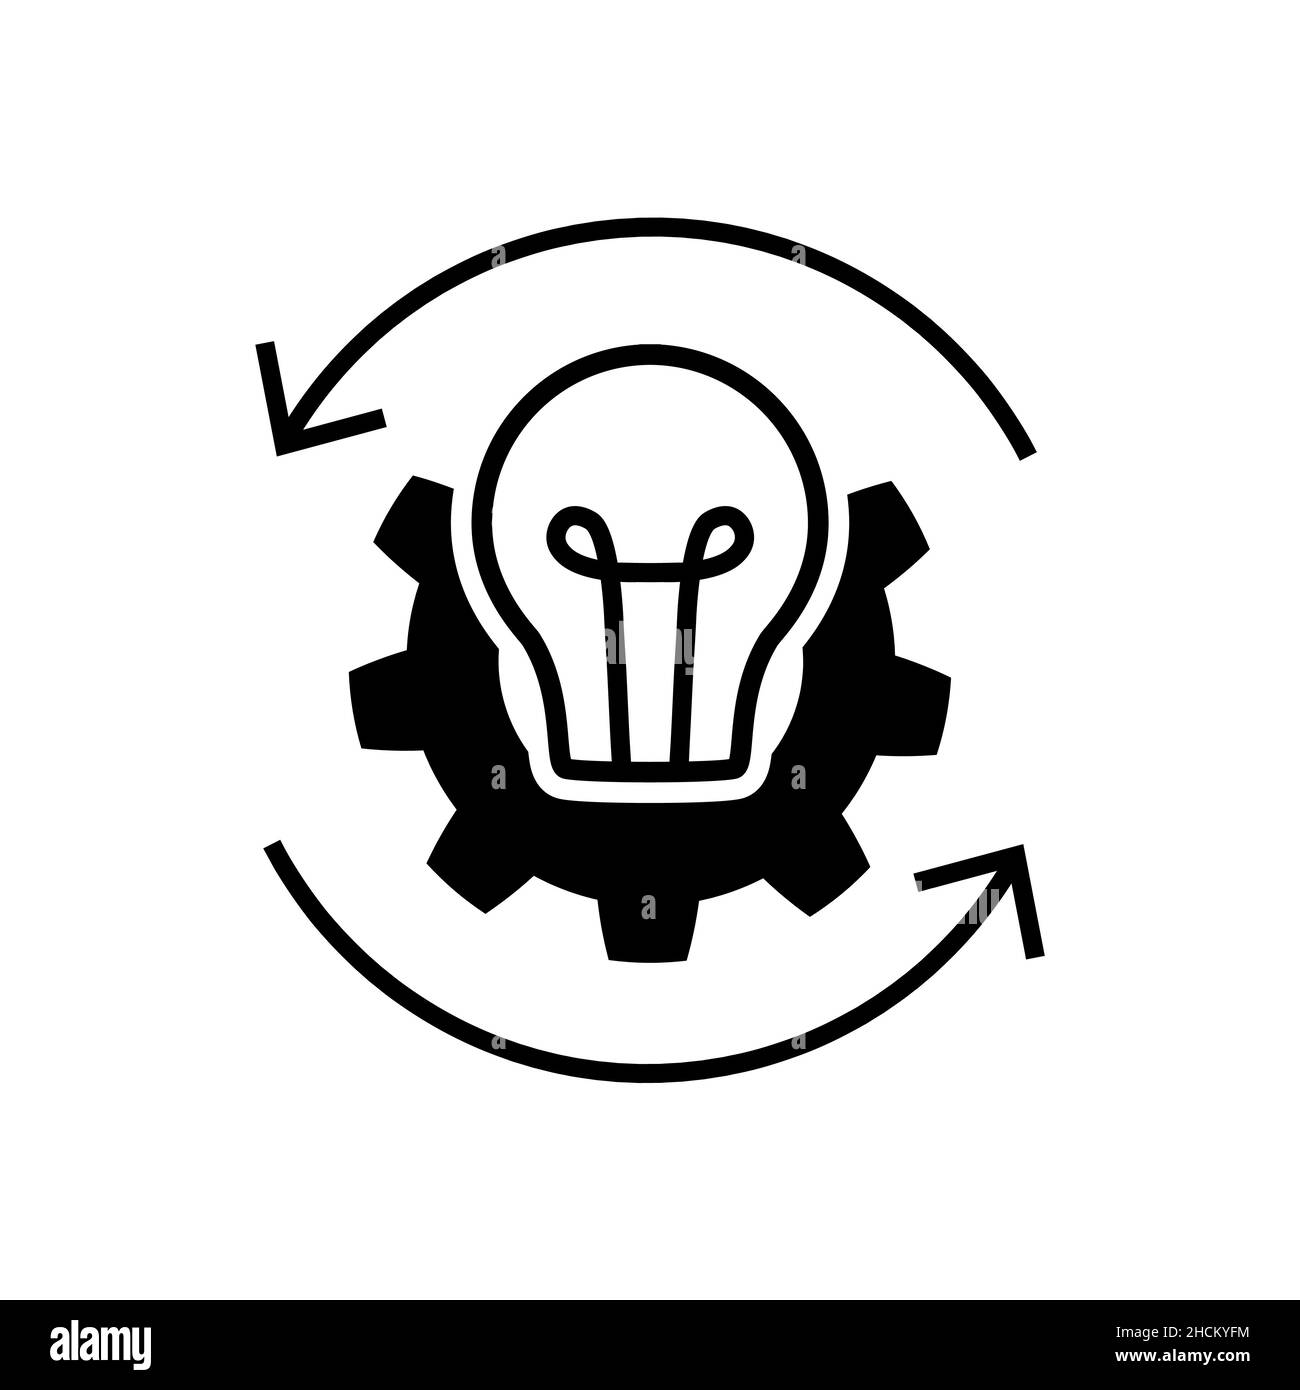 Process vector icon. Lightbulb symbol in flat style. Innovation concept. Light bulb with gear and arrows sign. Light bulb creative icon. Simple Idea s Stock Vector